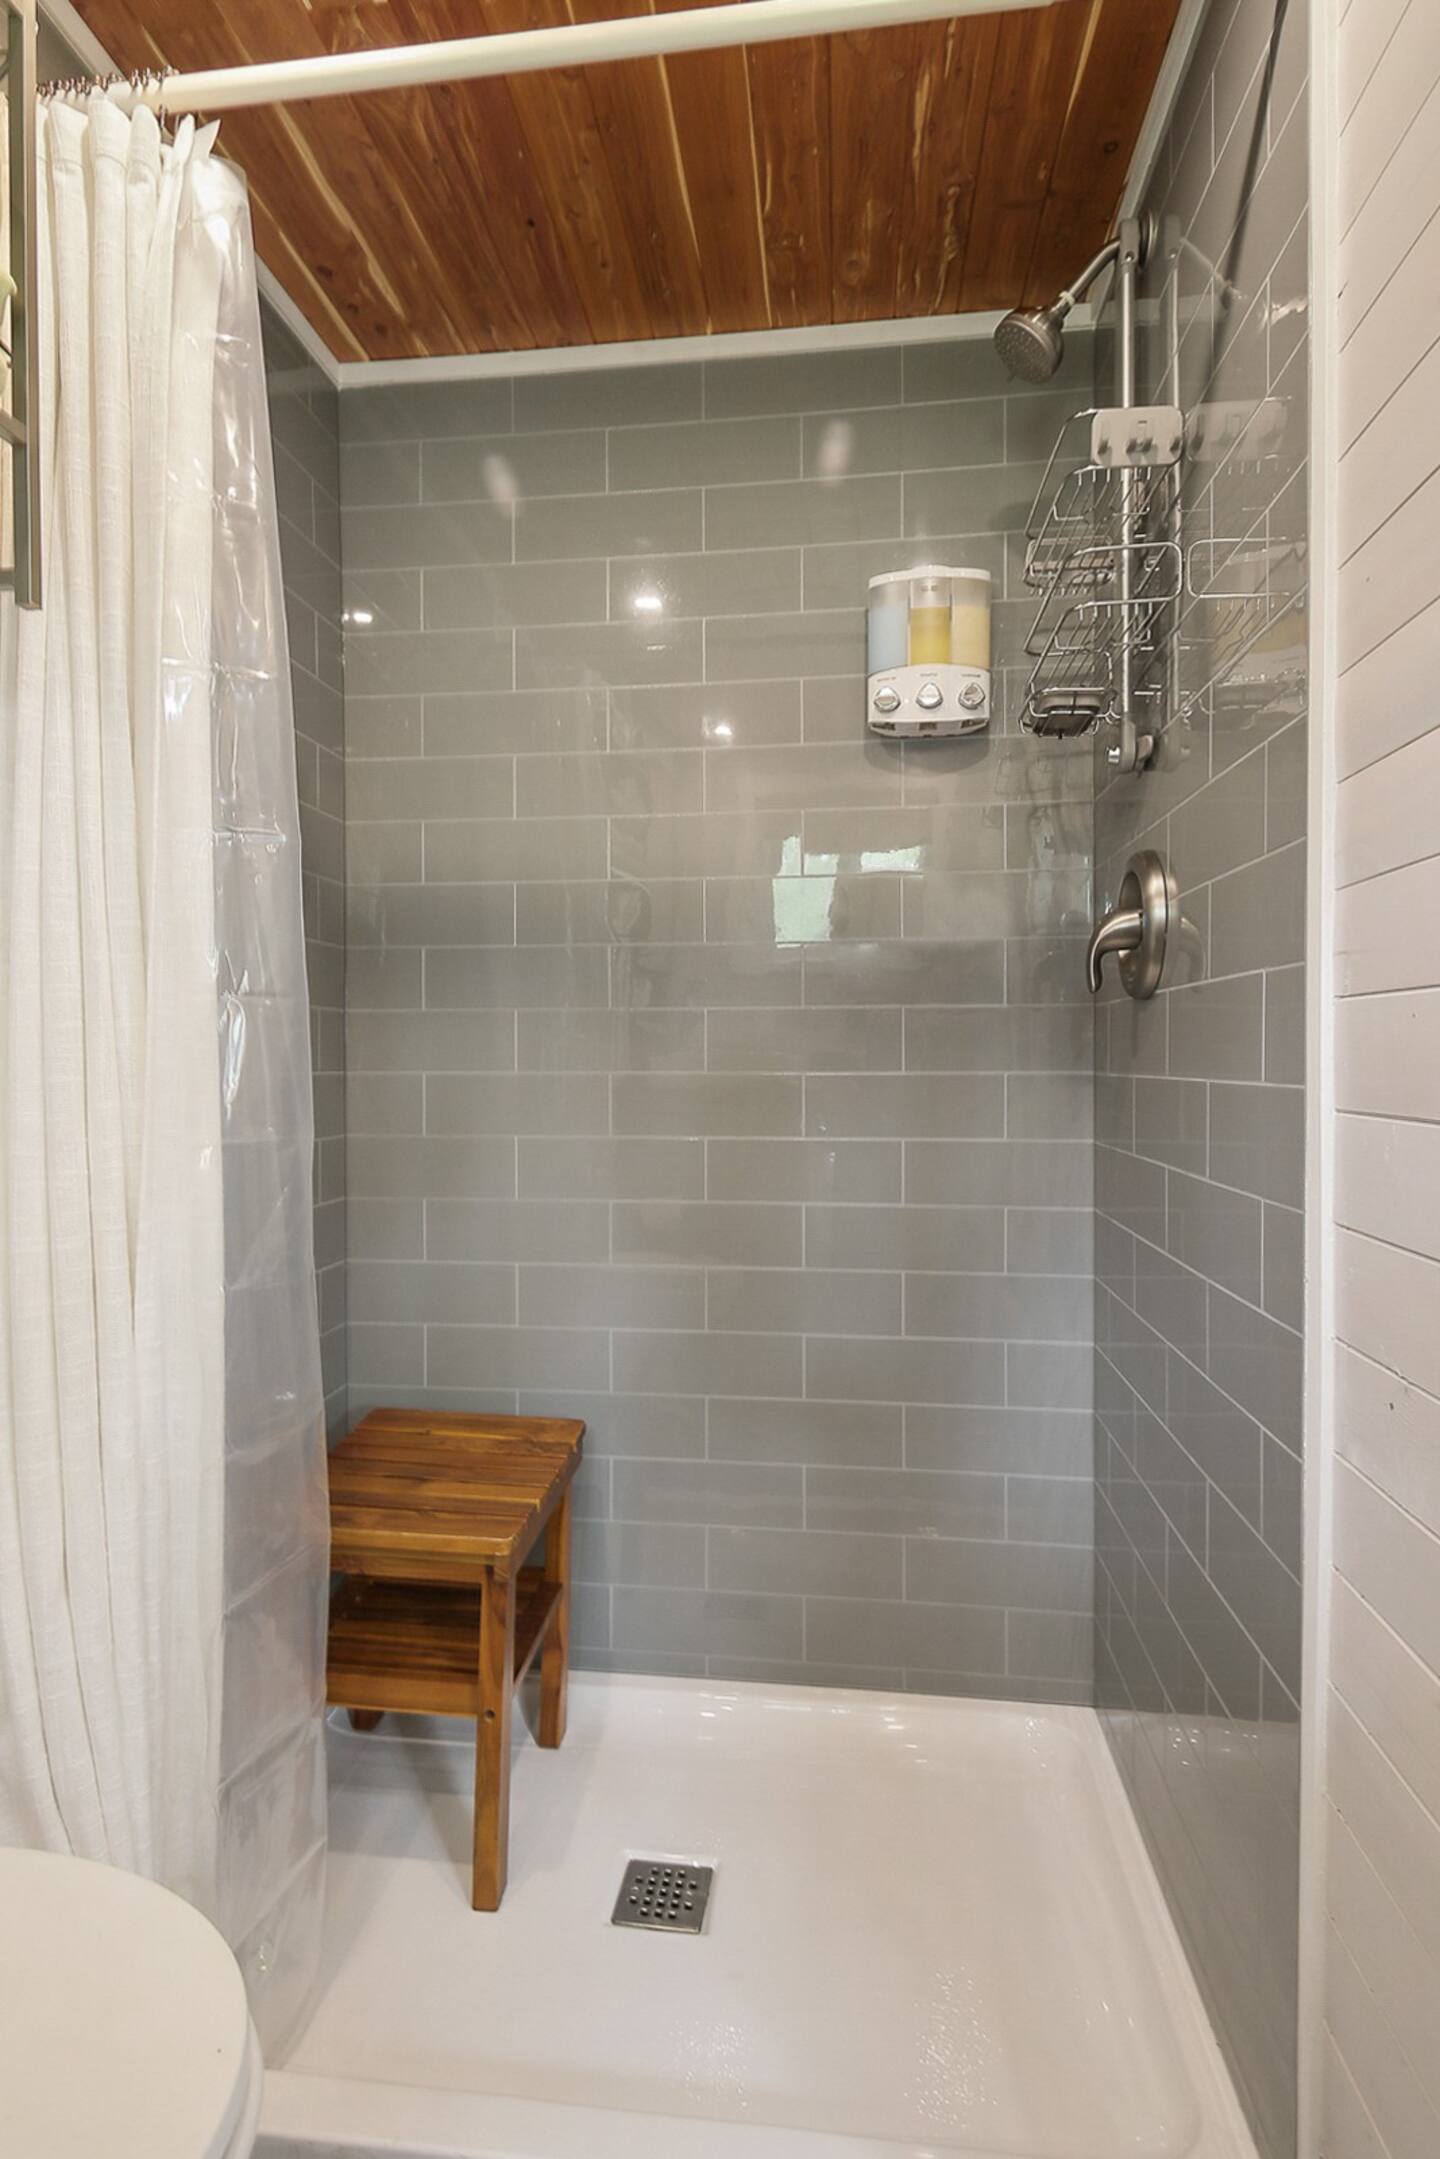 Shower with grey tiles and wood small chair